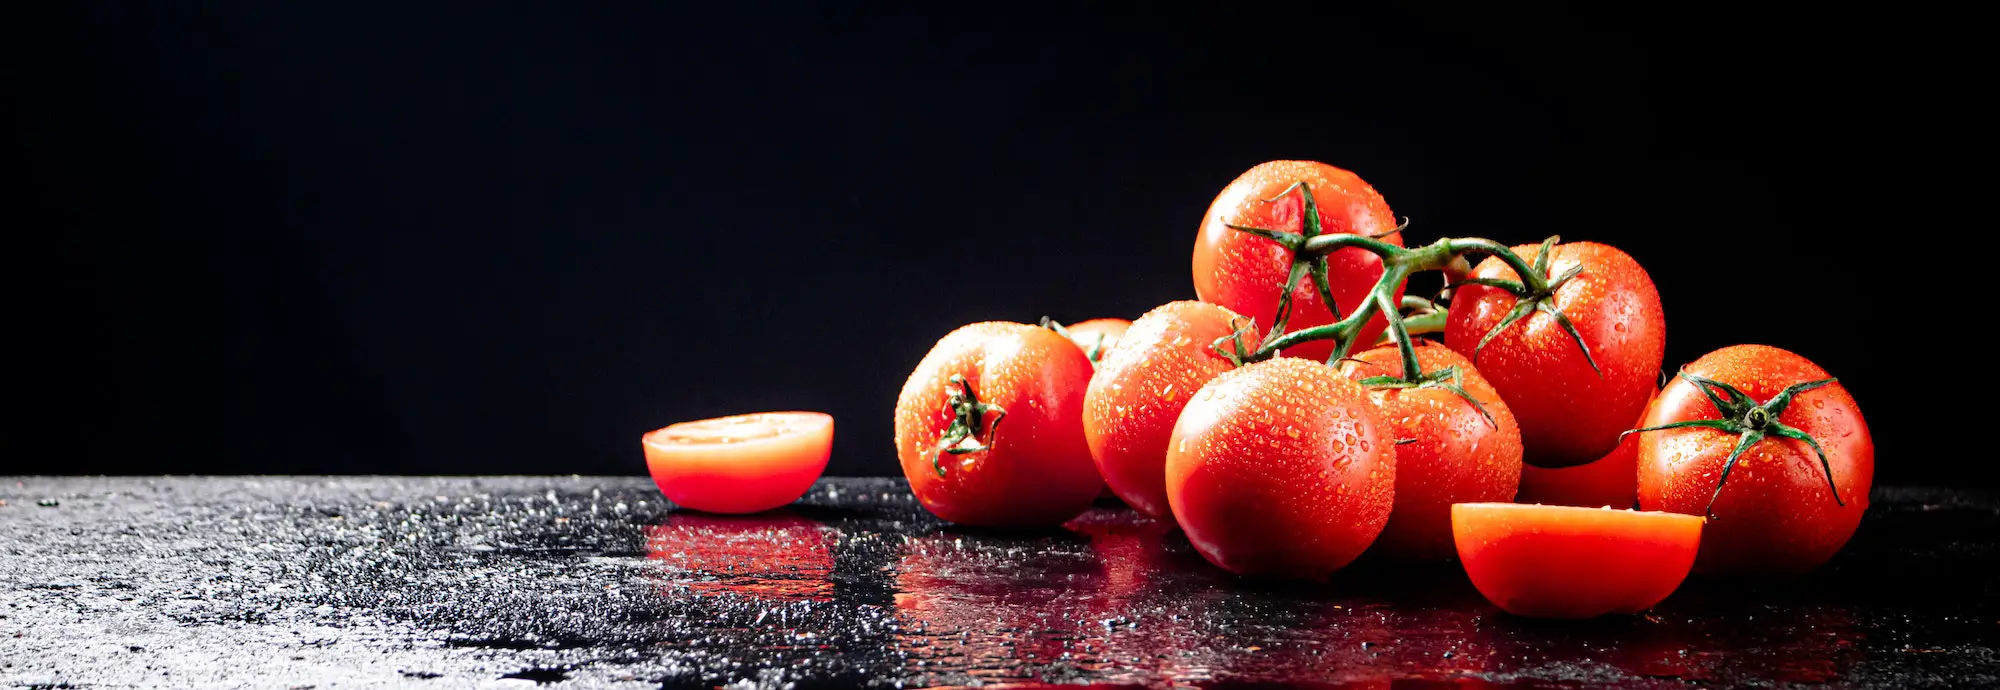 Ripe tomatoes on a branch and tomato halves.